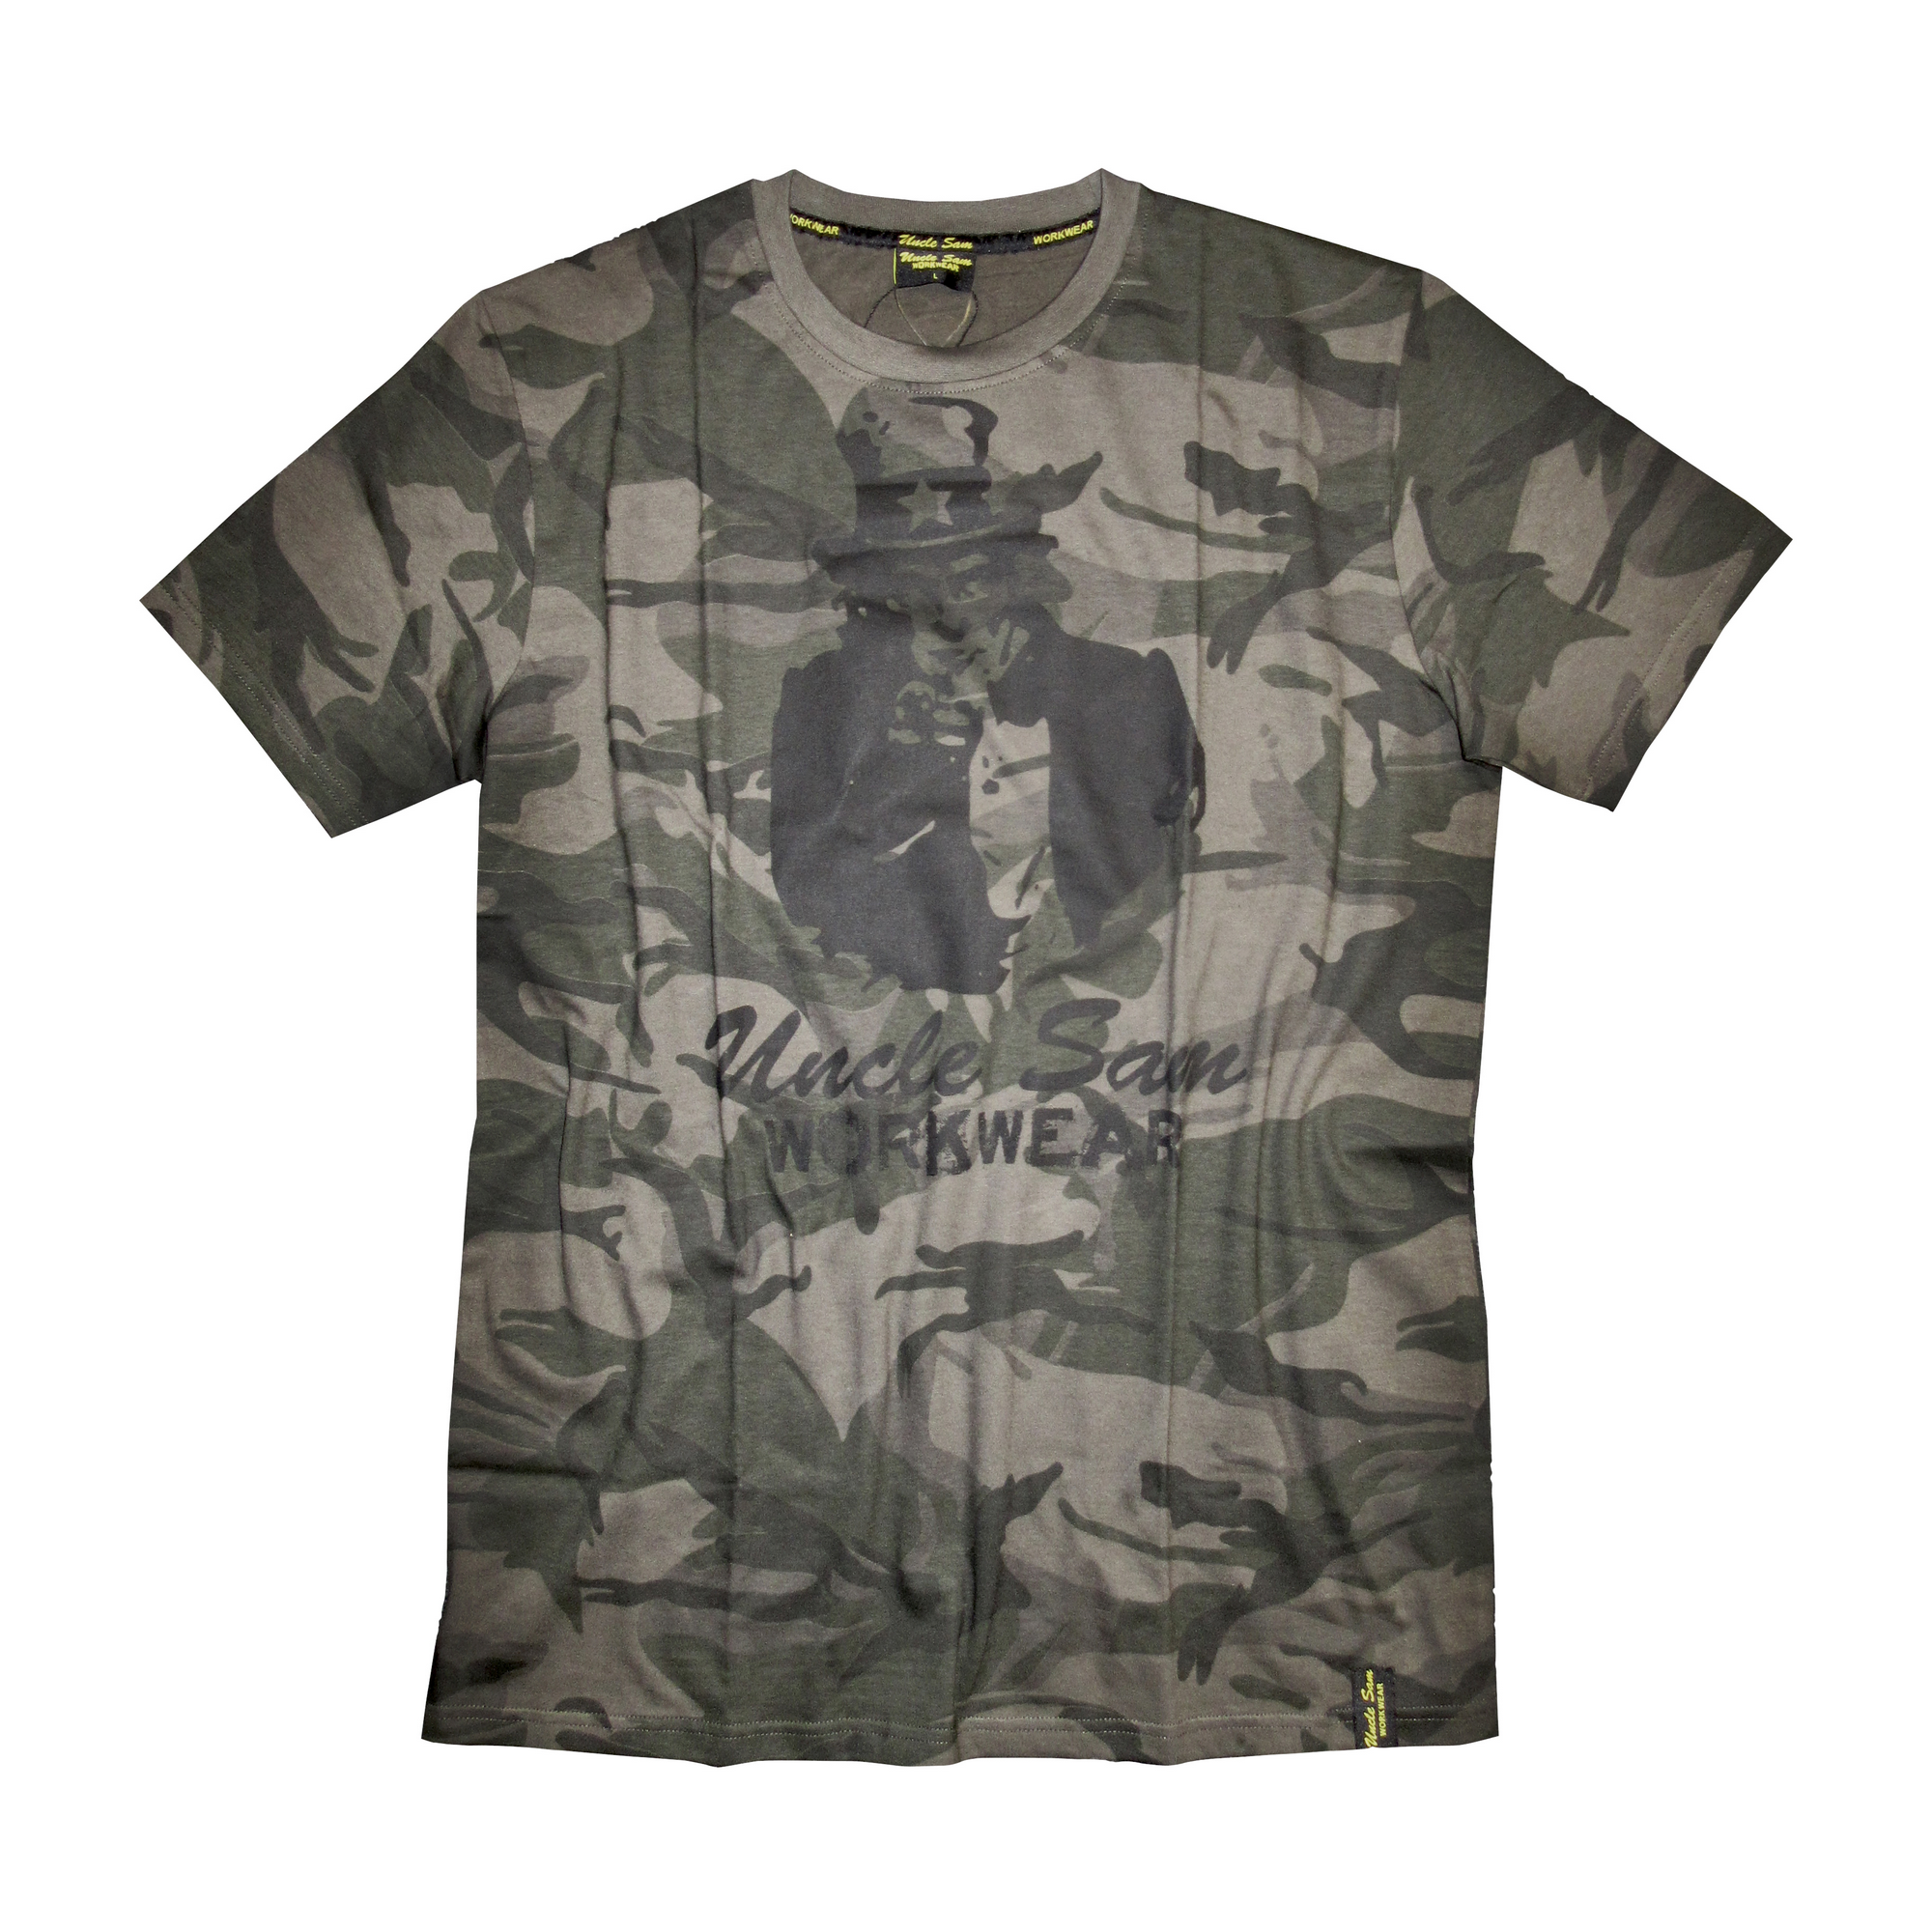 T-Shirt 'Workwear' olive/camouflage 2XL, Baumwolle + product picture